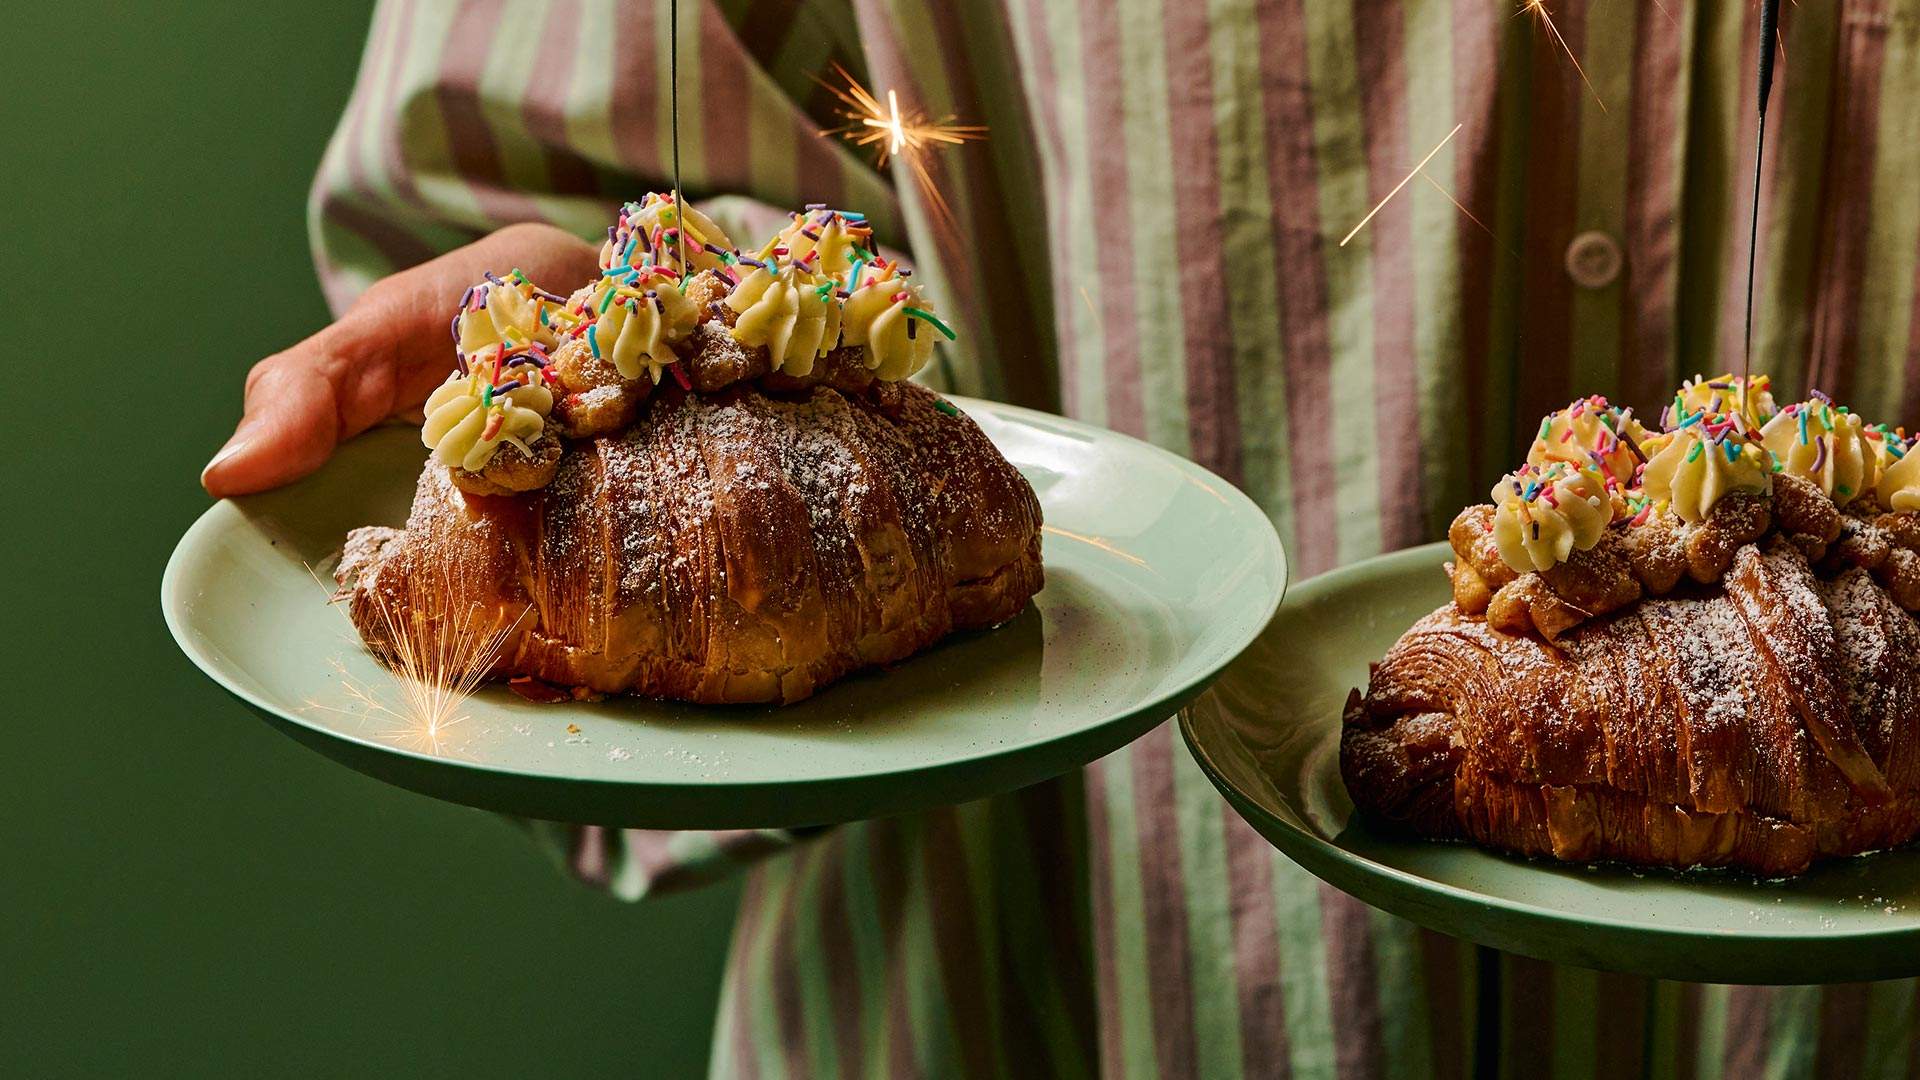 Lune Has Just Dropped Its First-Ever Cookbook So You Can Make Its World-Famous Croissants At Home